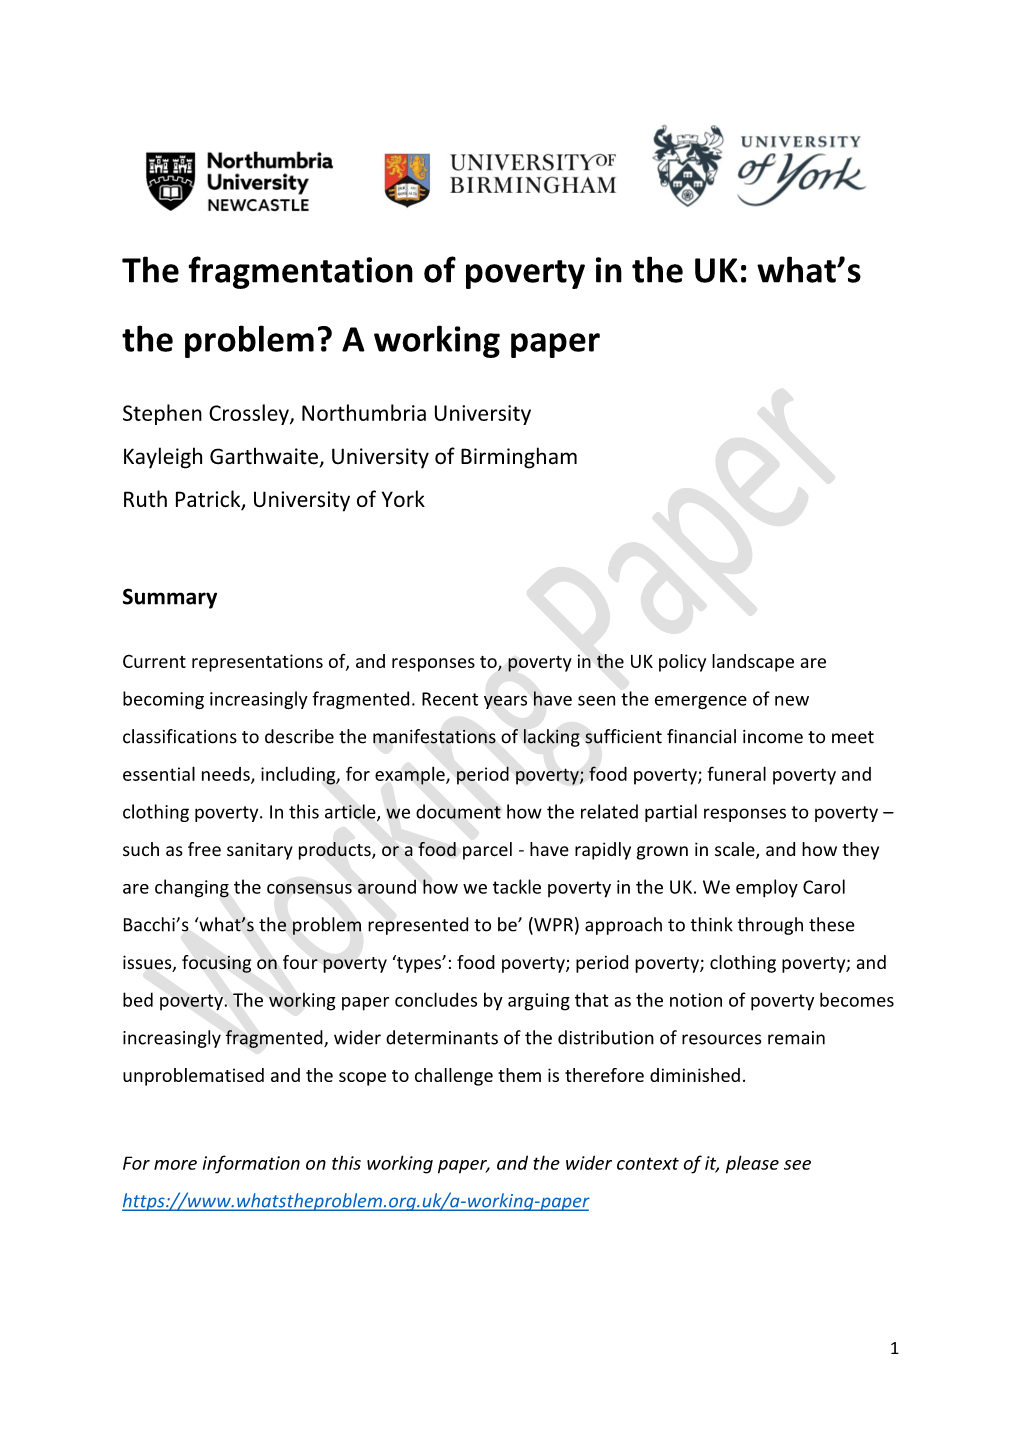 The Fragmentation of Poverty in the UK: What's the Problem?